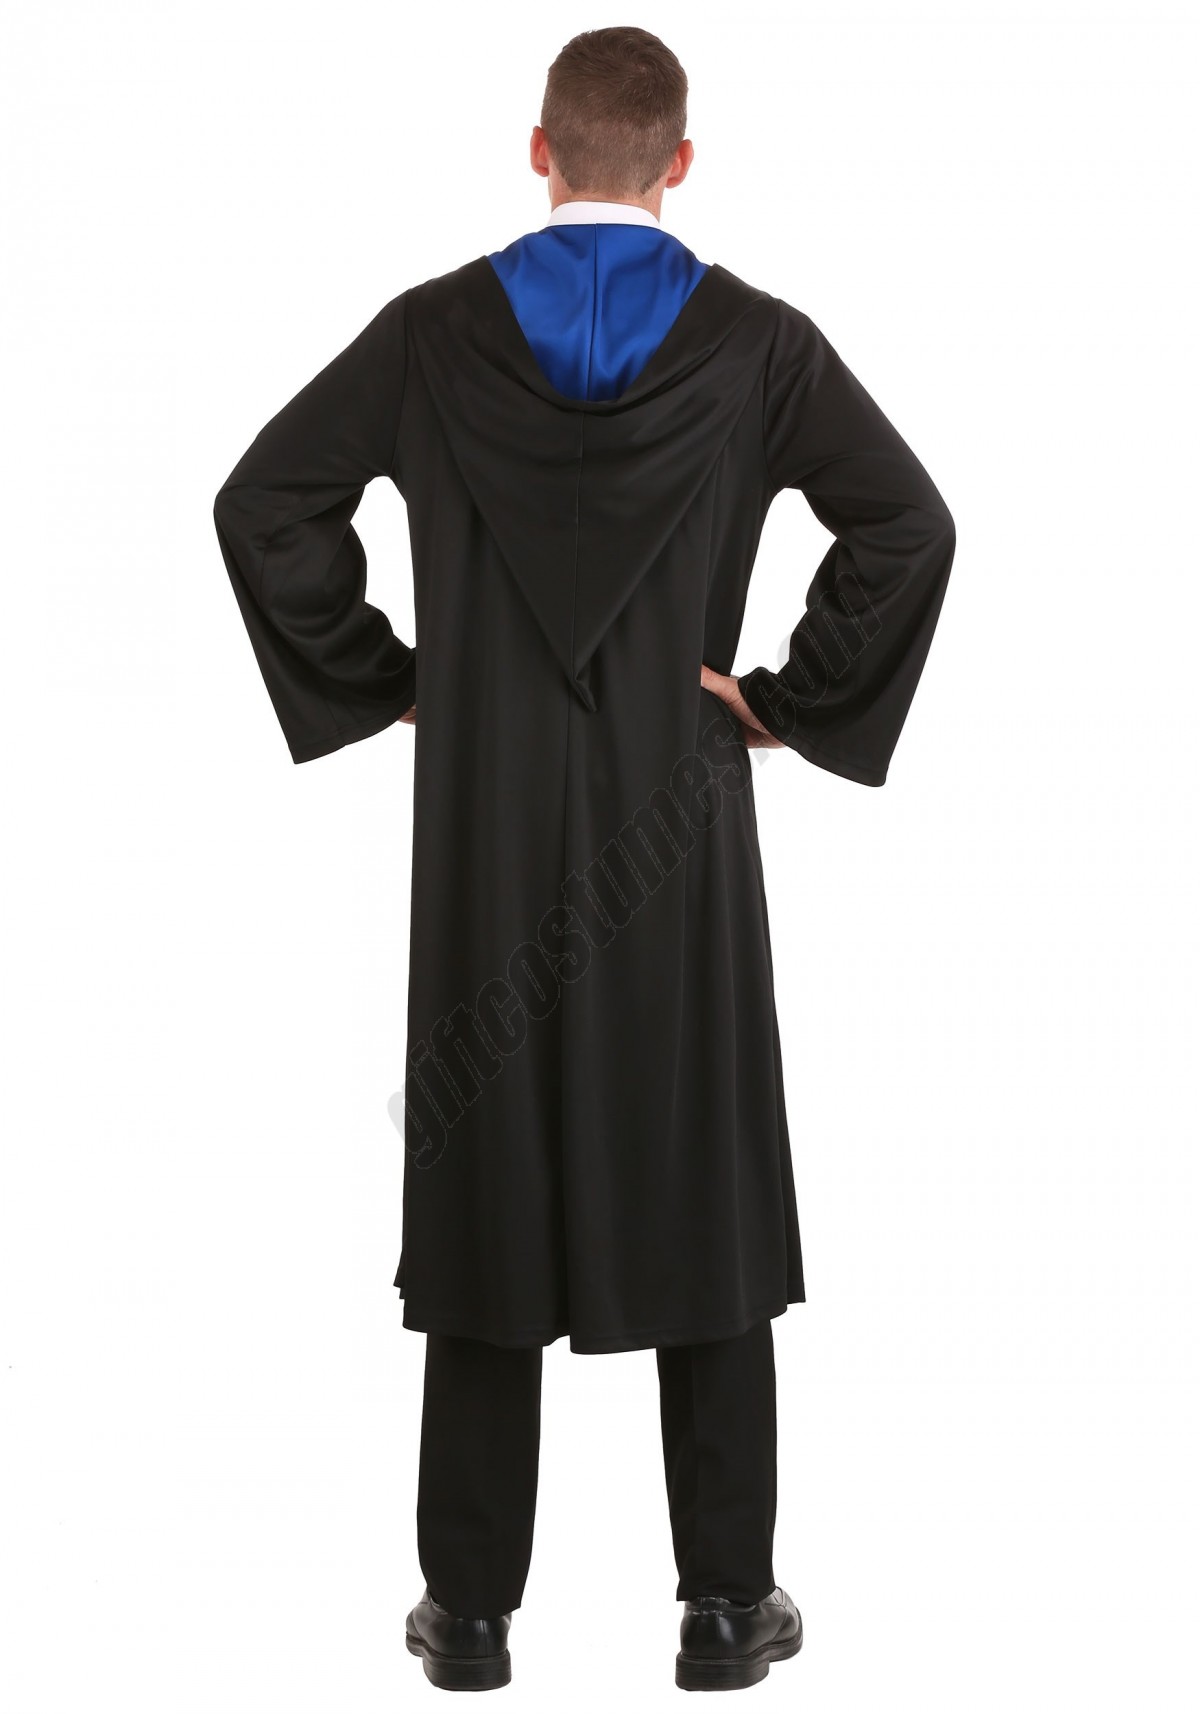 Adult Harry Potter Ravenclaw Robe Costume Promotions - -2